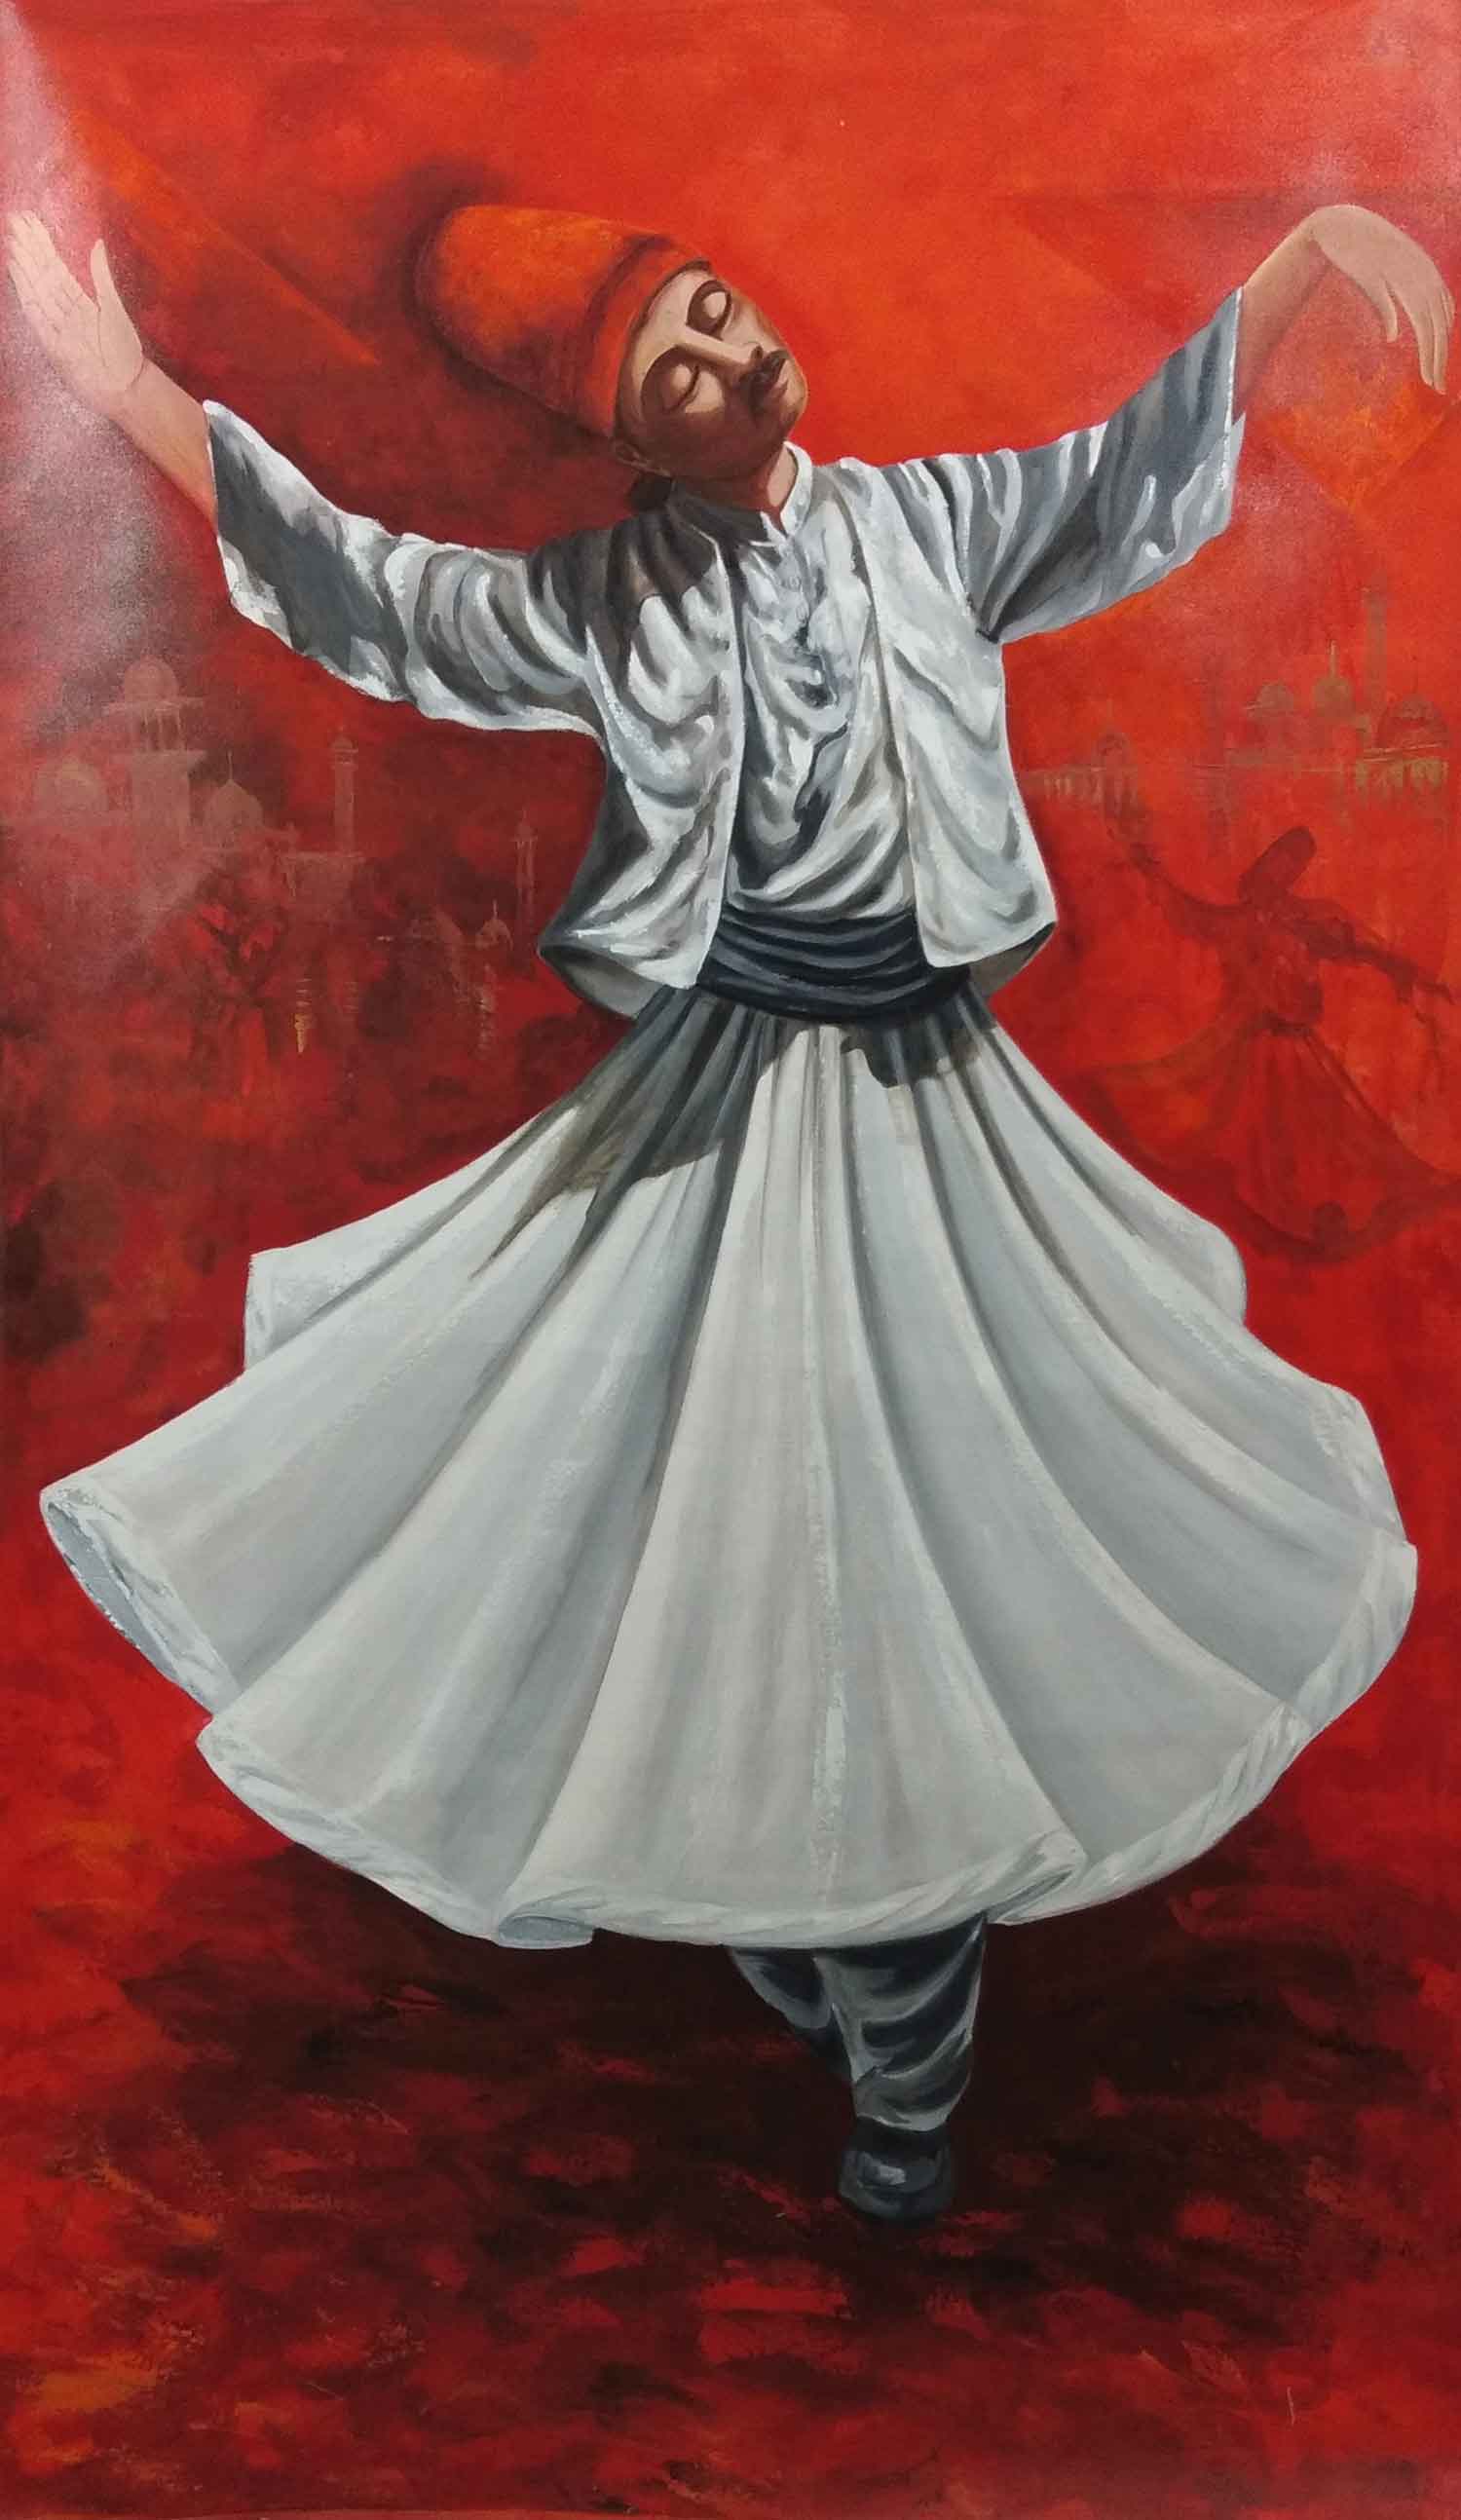 Impressionism Painting with Acrylic on Canvas "Sufi" art by Ghanshyam Kashyap